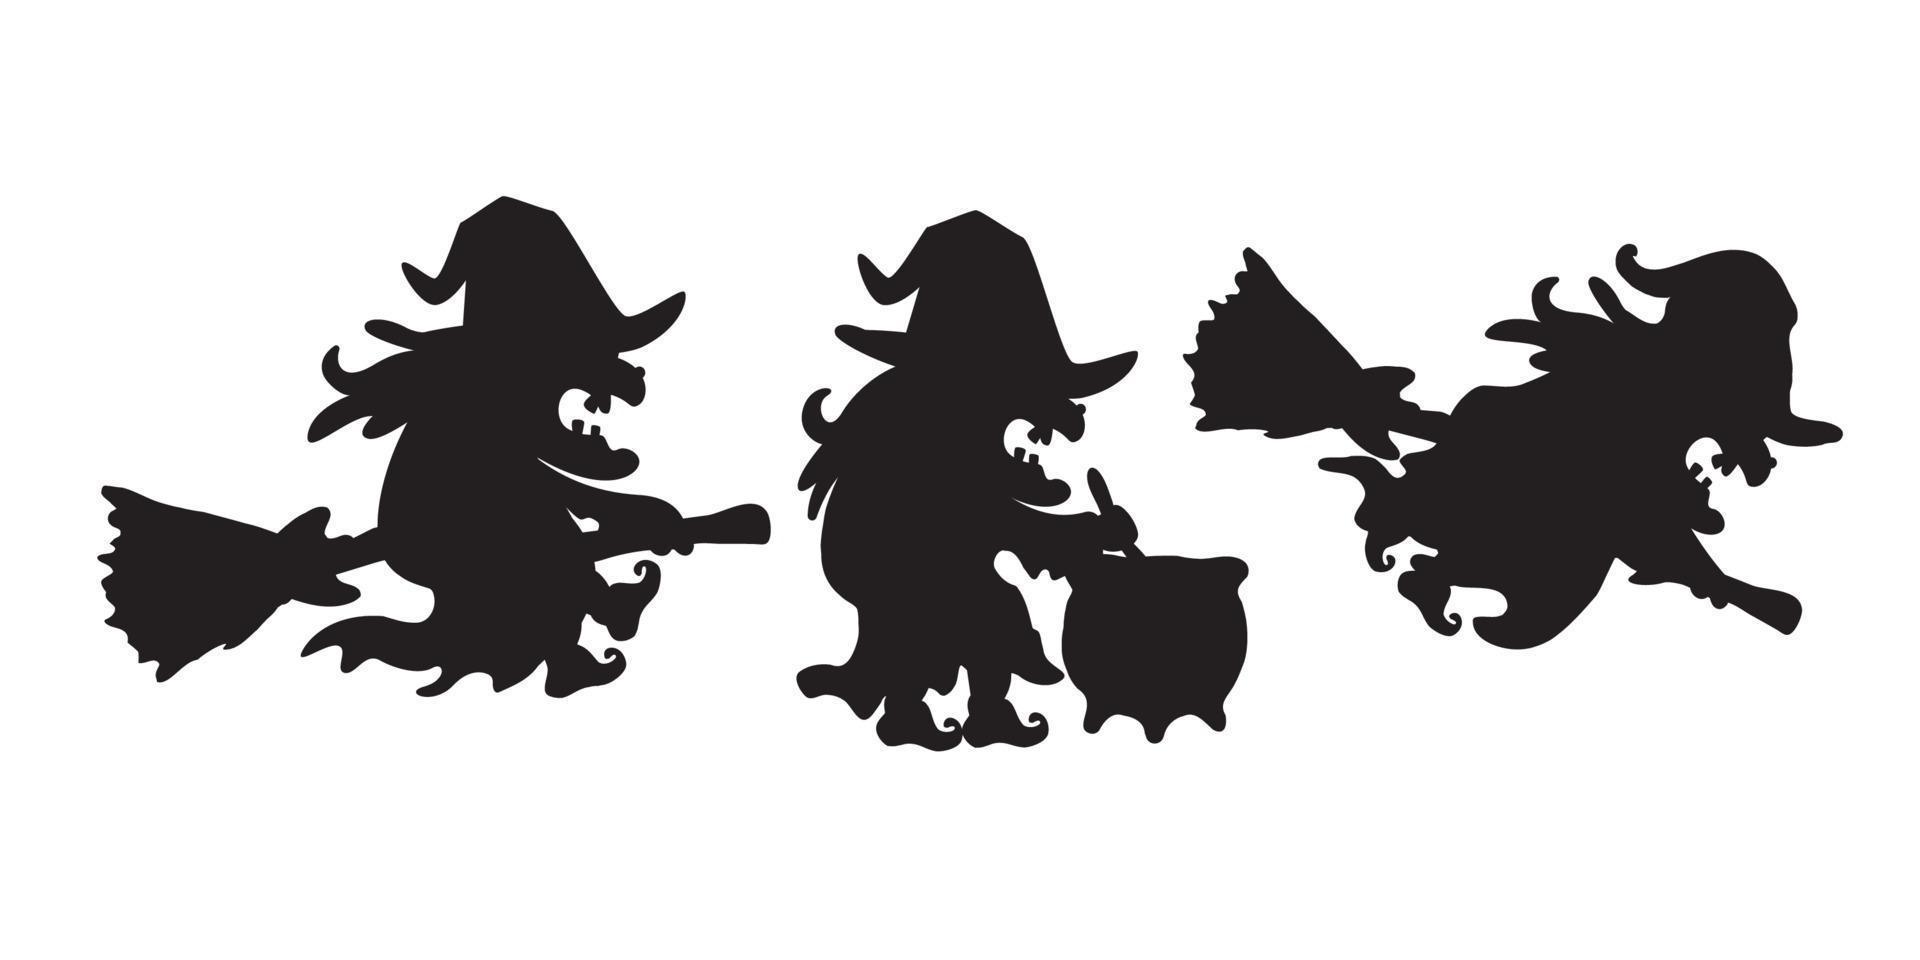 The silhouette witch riding a flying broomstick. vector